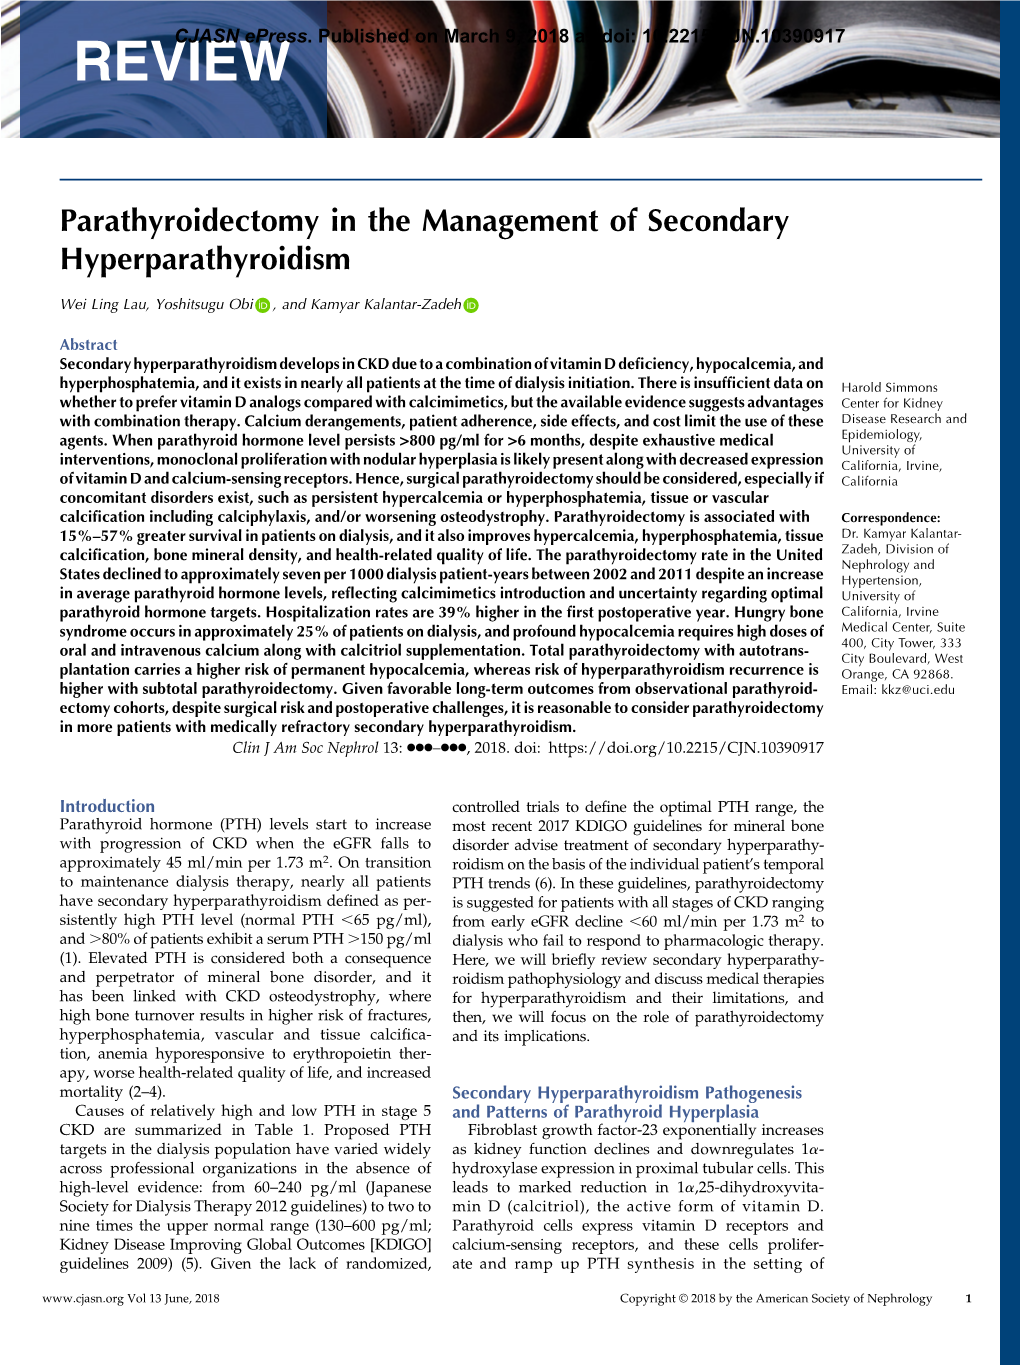 Parathyroidectomy in the Management of Secondary Hyperparathyroidism